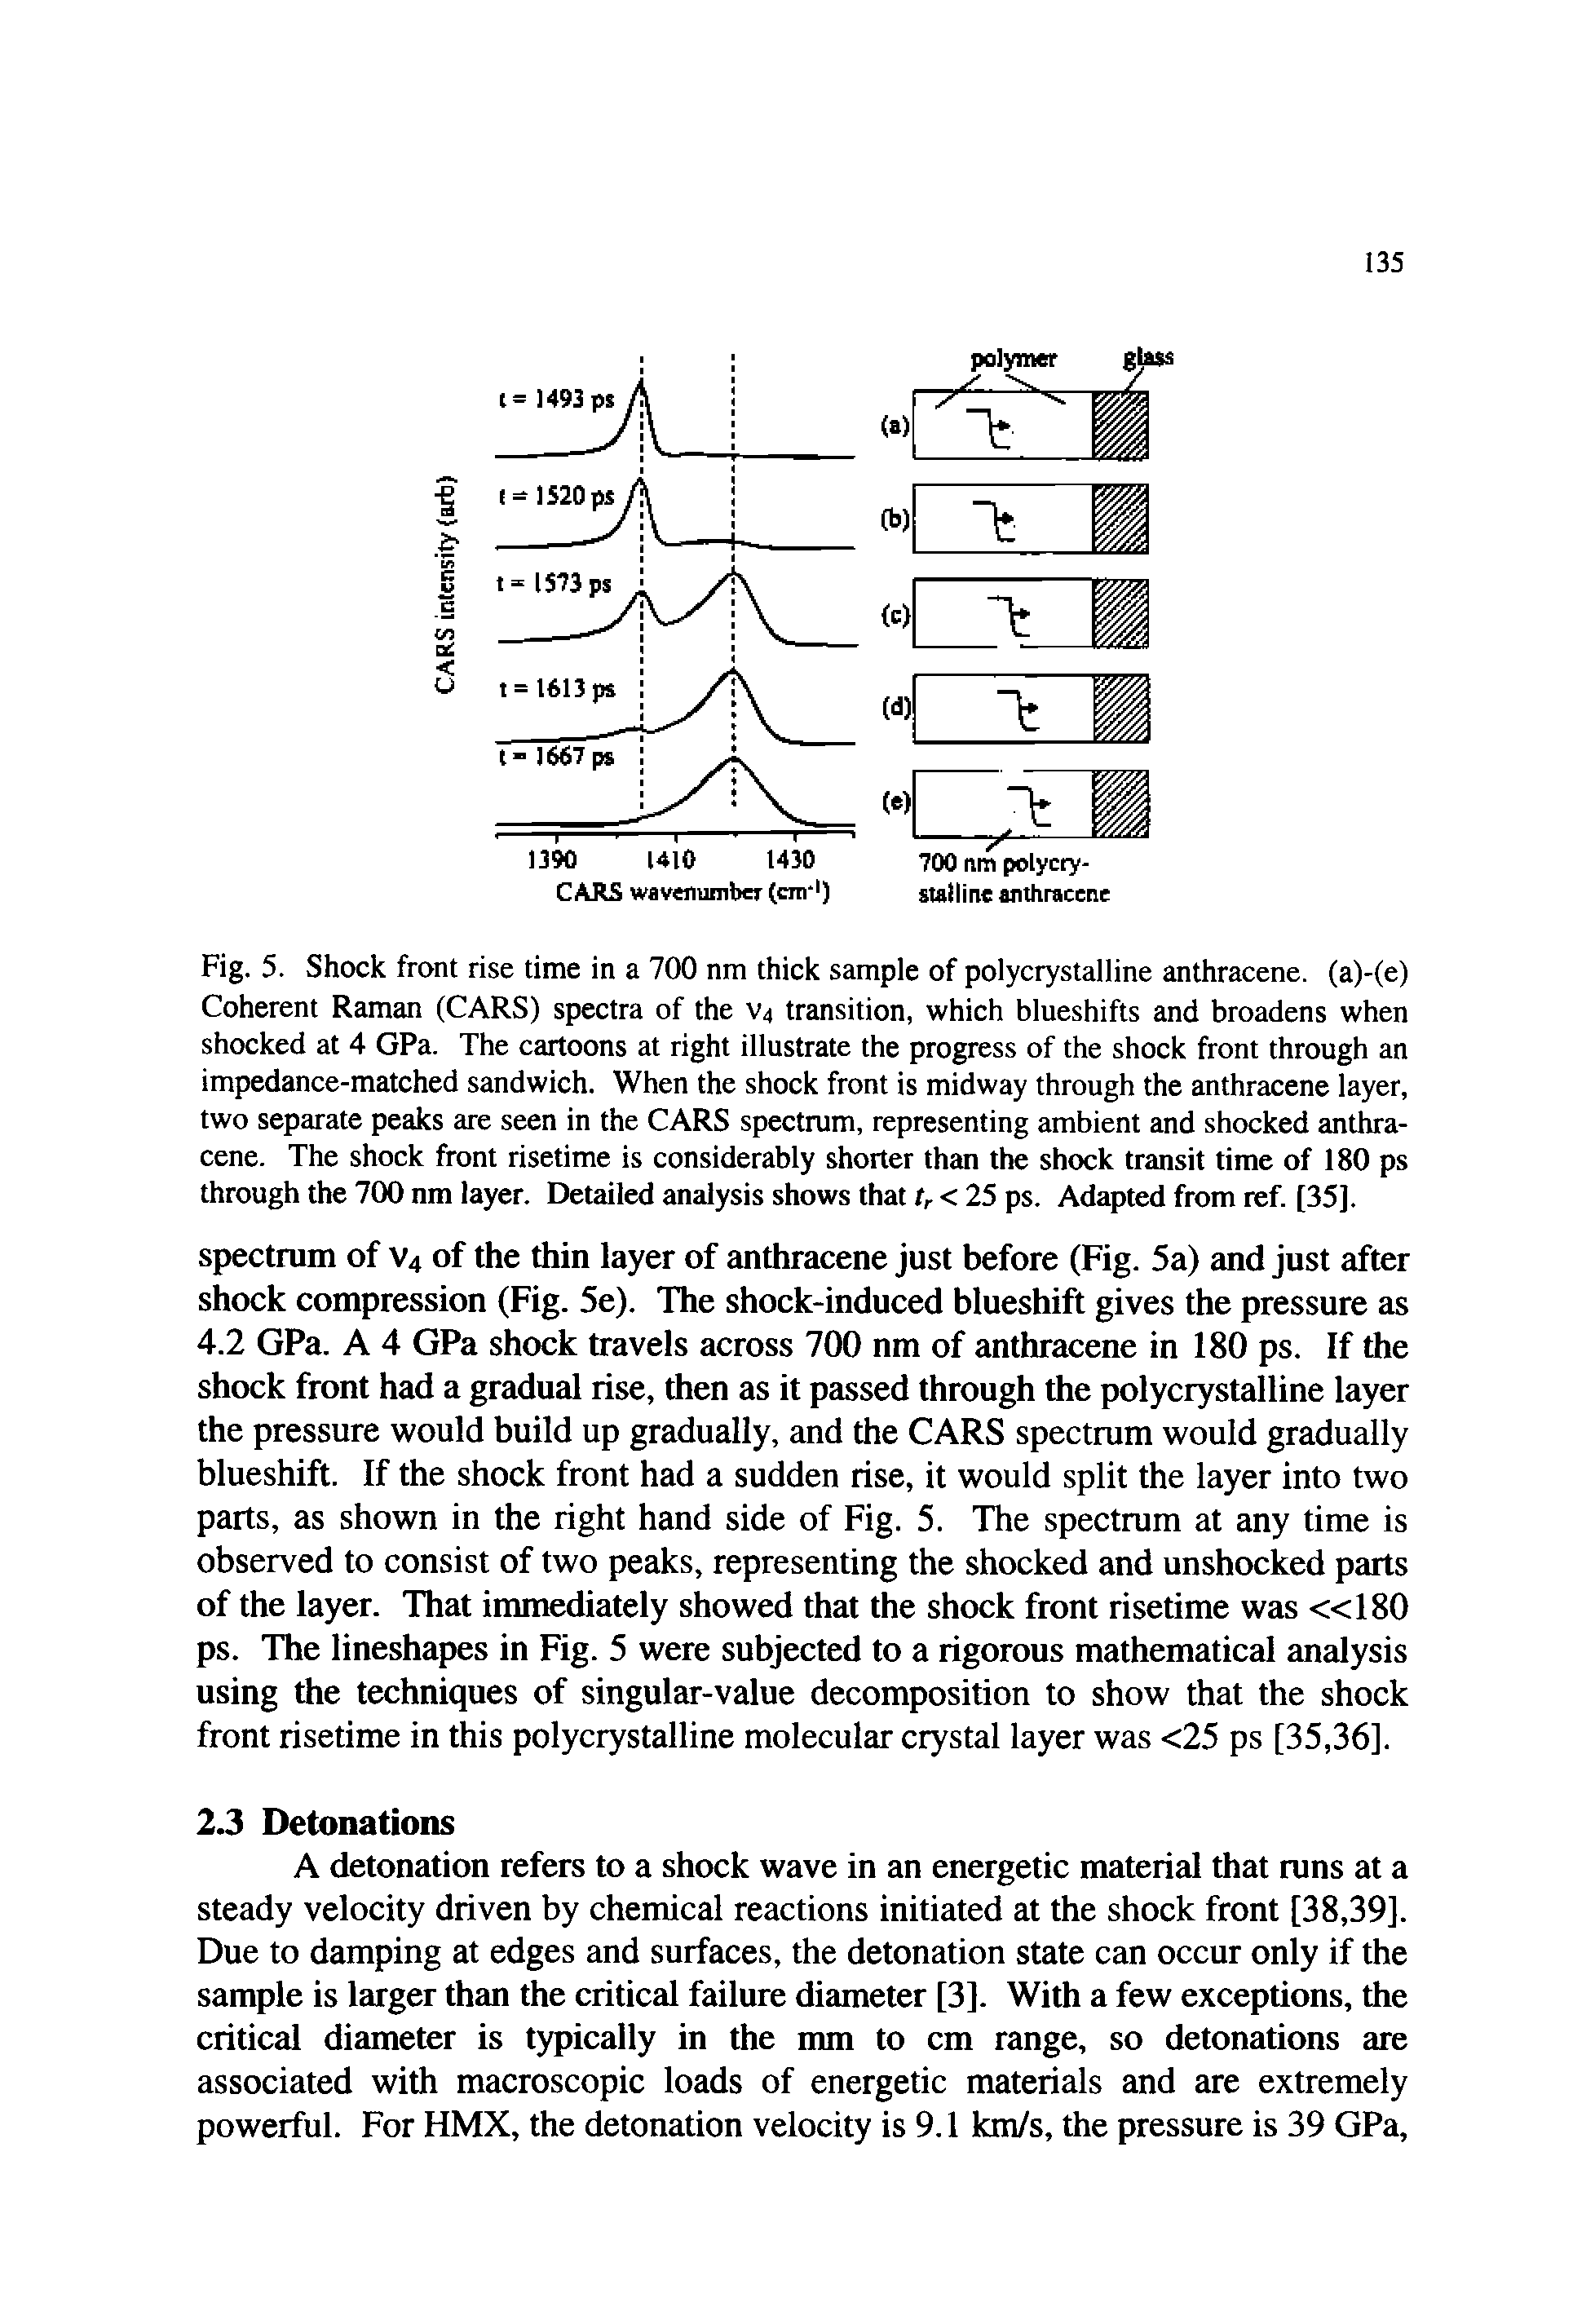 Fig. 5. Shock front rise time in a 700 nm thick sample of polycrystalline anthracene, (a)-(e) Coherent Raman (CARS) spectra of the V4 transition, which blueshifts and broadens when shocked at 4 GPa. The cartoons at right illustrate the progress of the shock front through an impedance-matched sandwich. When the shock front is midway through the anthracene layer, two separate peaks are seen in the CARS spectrum, representing ambient and shocked anthracene. The shock front risetime is considerably shorter than the shock transit time of 180 ps through the 700 nm layer. Detailed analysis shows that tr < 25 ps. Adapted from ref. [35].